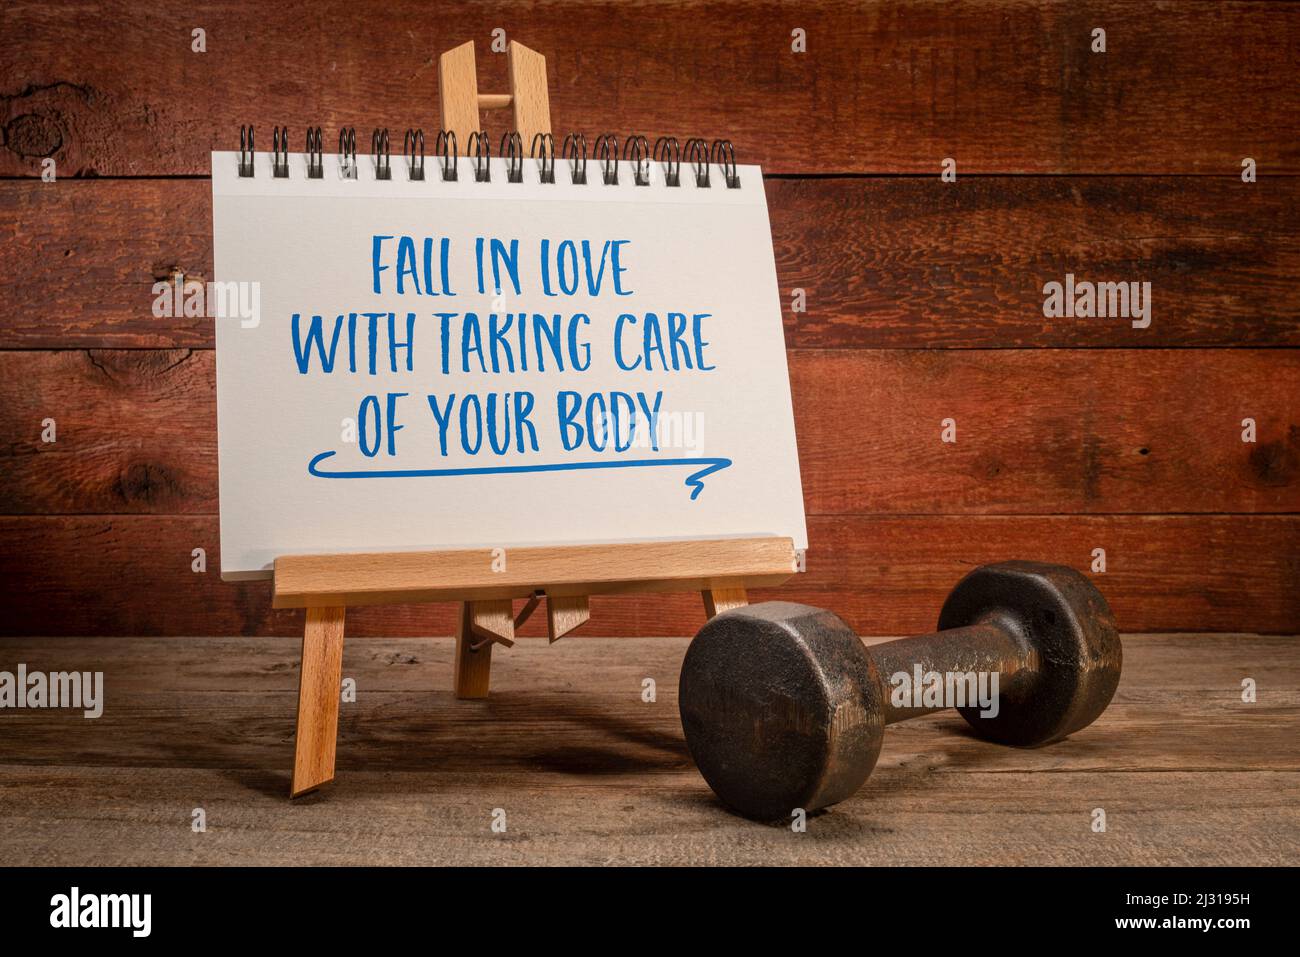 fall in love with taking care of your body, exercise and self care concept, small easel sign with a dumbbell against rustic wood Stock Photo